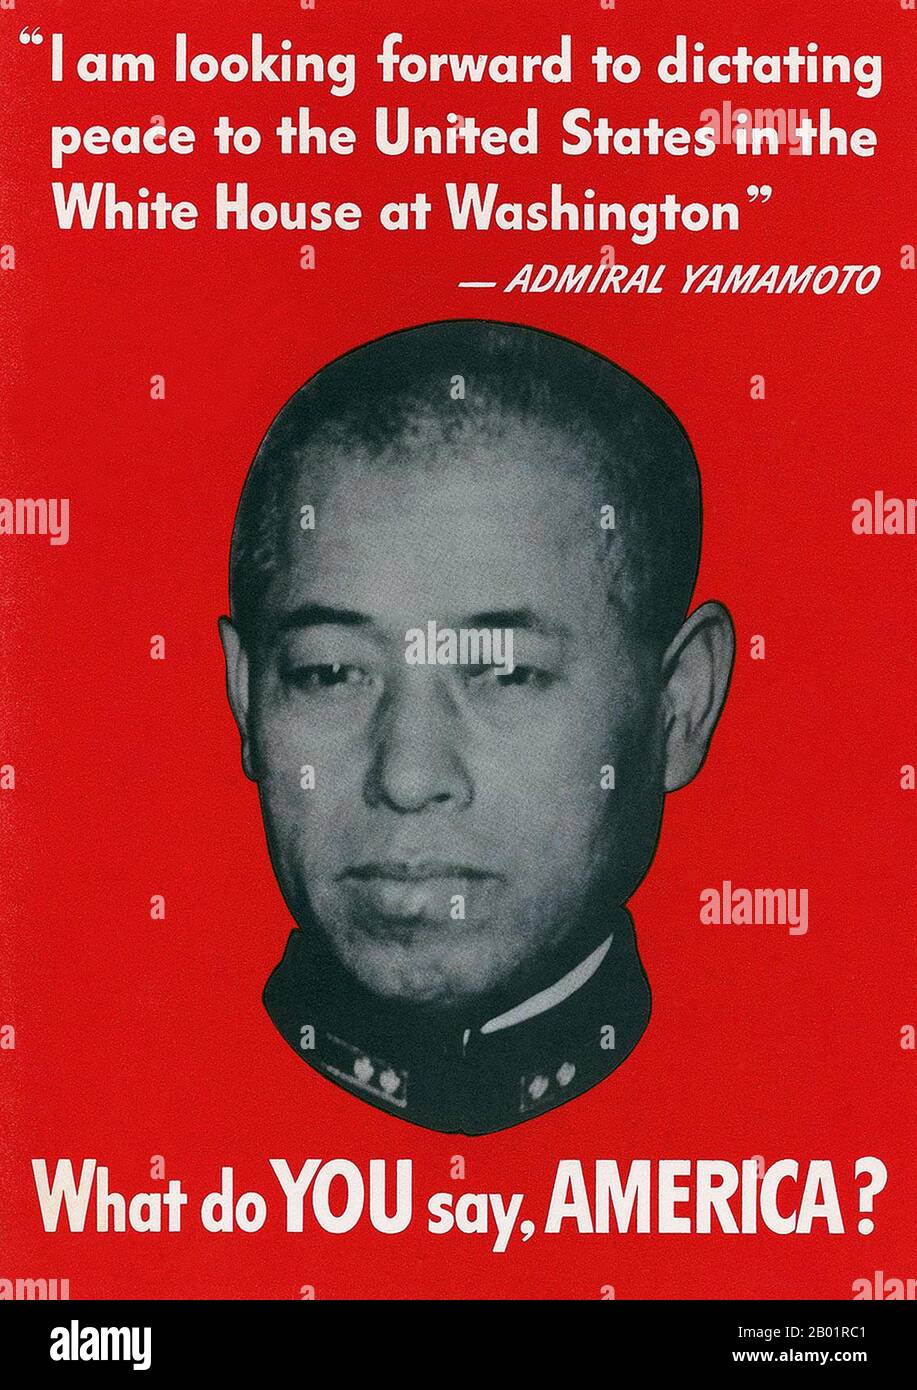 USA/Japan: 'What do YOU say, America?' World War II propaganda poster produced by the Office of War Information, Washington DC, featuring Imperial Japanese Navy Admiral Yamamoto, c. 1941-1945.  Isoroku Yamamoto (4 April 1884 - 18 April 1943) was a Japanese Marshal Admiral and the commander-in-chief of the Combined Fleet during World War II, a graduate of the Imperial Japanese Naval Academy and mastermind of Pearl Harbour.  Yamamoto held several important posts in the Imperial Japanese Navy, and undertook many of its changes and reorganisations, especially its development of naval aviation. Stock Photo